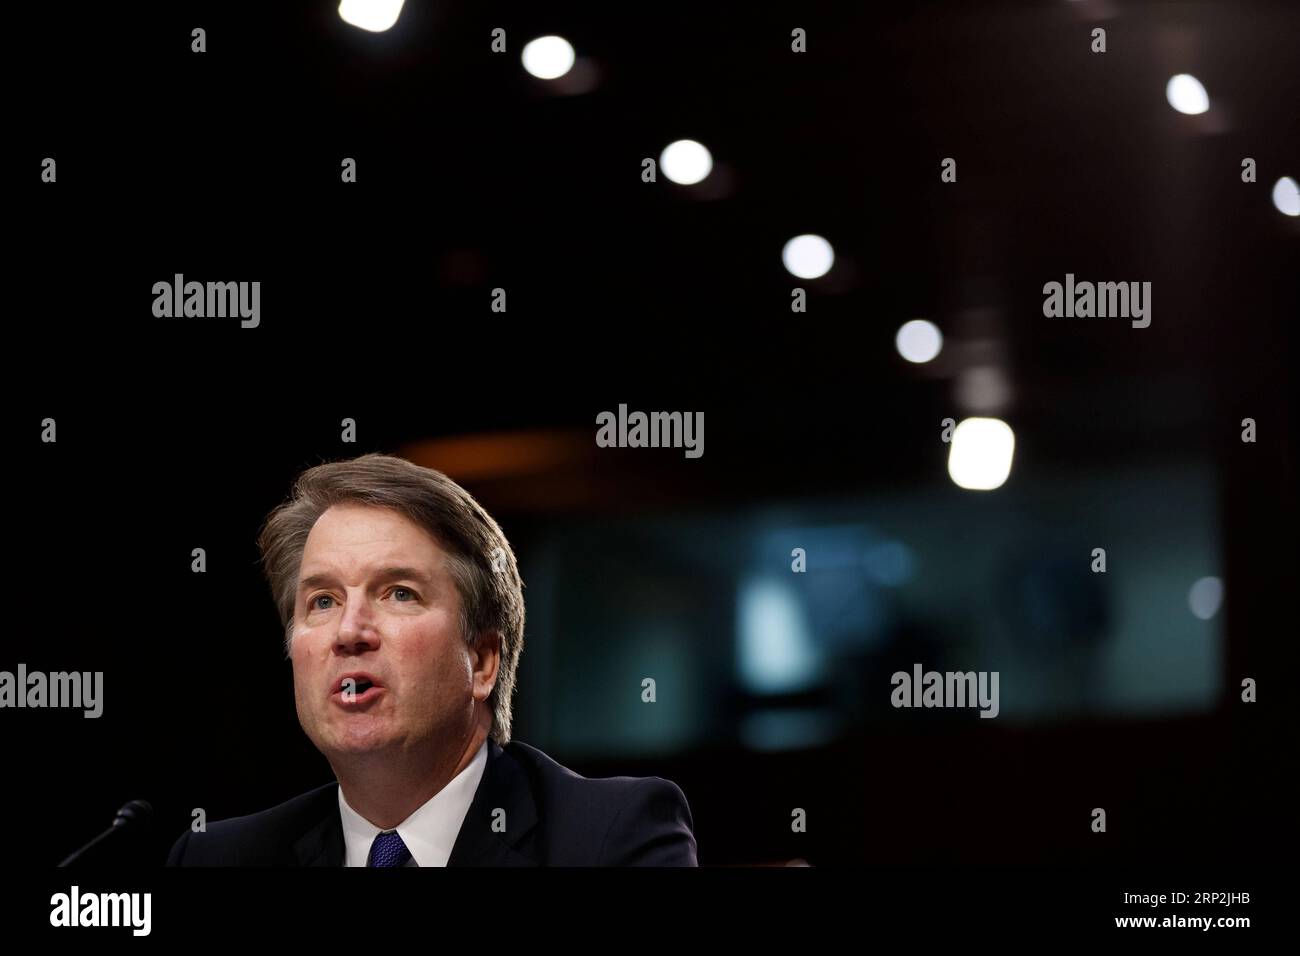 (180905) -- WASHINGTON, Sept. 5, 2018 -- U.S. Supreme Court nominee Judge Brett Kavanaugh listens during his Senate confirmation hearing on Capitol Hill in Washington D.C., the United States, Sept. 4, 2018. The Senate confirmation hearing for Kavanaugh began Tuesday, which has descended into chaos as Democrats protested about Republicans blocking access to documents concerning the judge. ) (jmmn) U.S.-WASHINGTON D.C.-BRETT KAVANAUGH-HEARING TingxShen PUBLICATIONxNOTxINxCHN Stock Photo